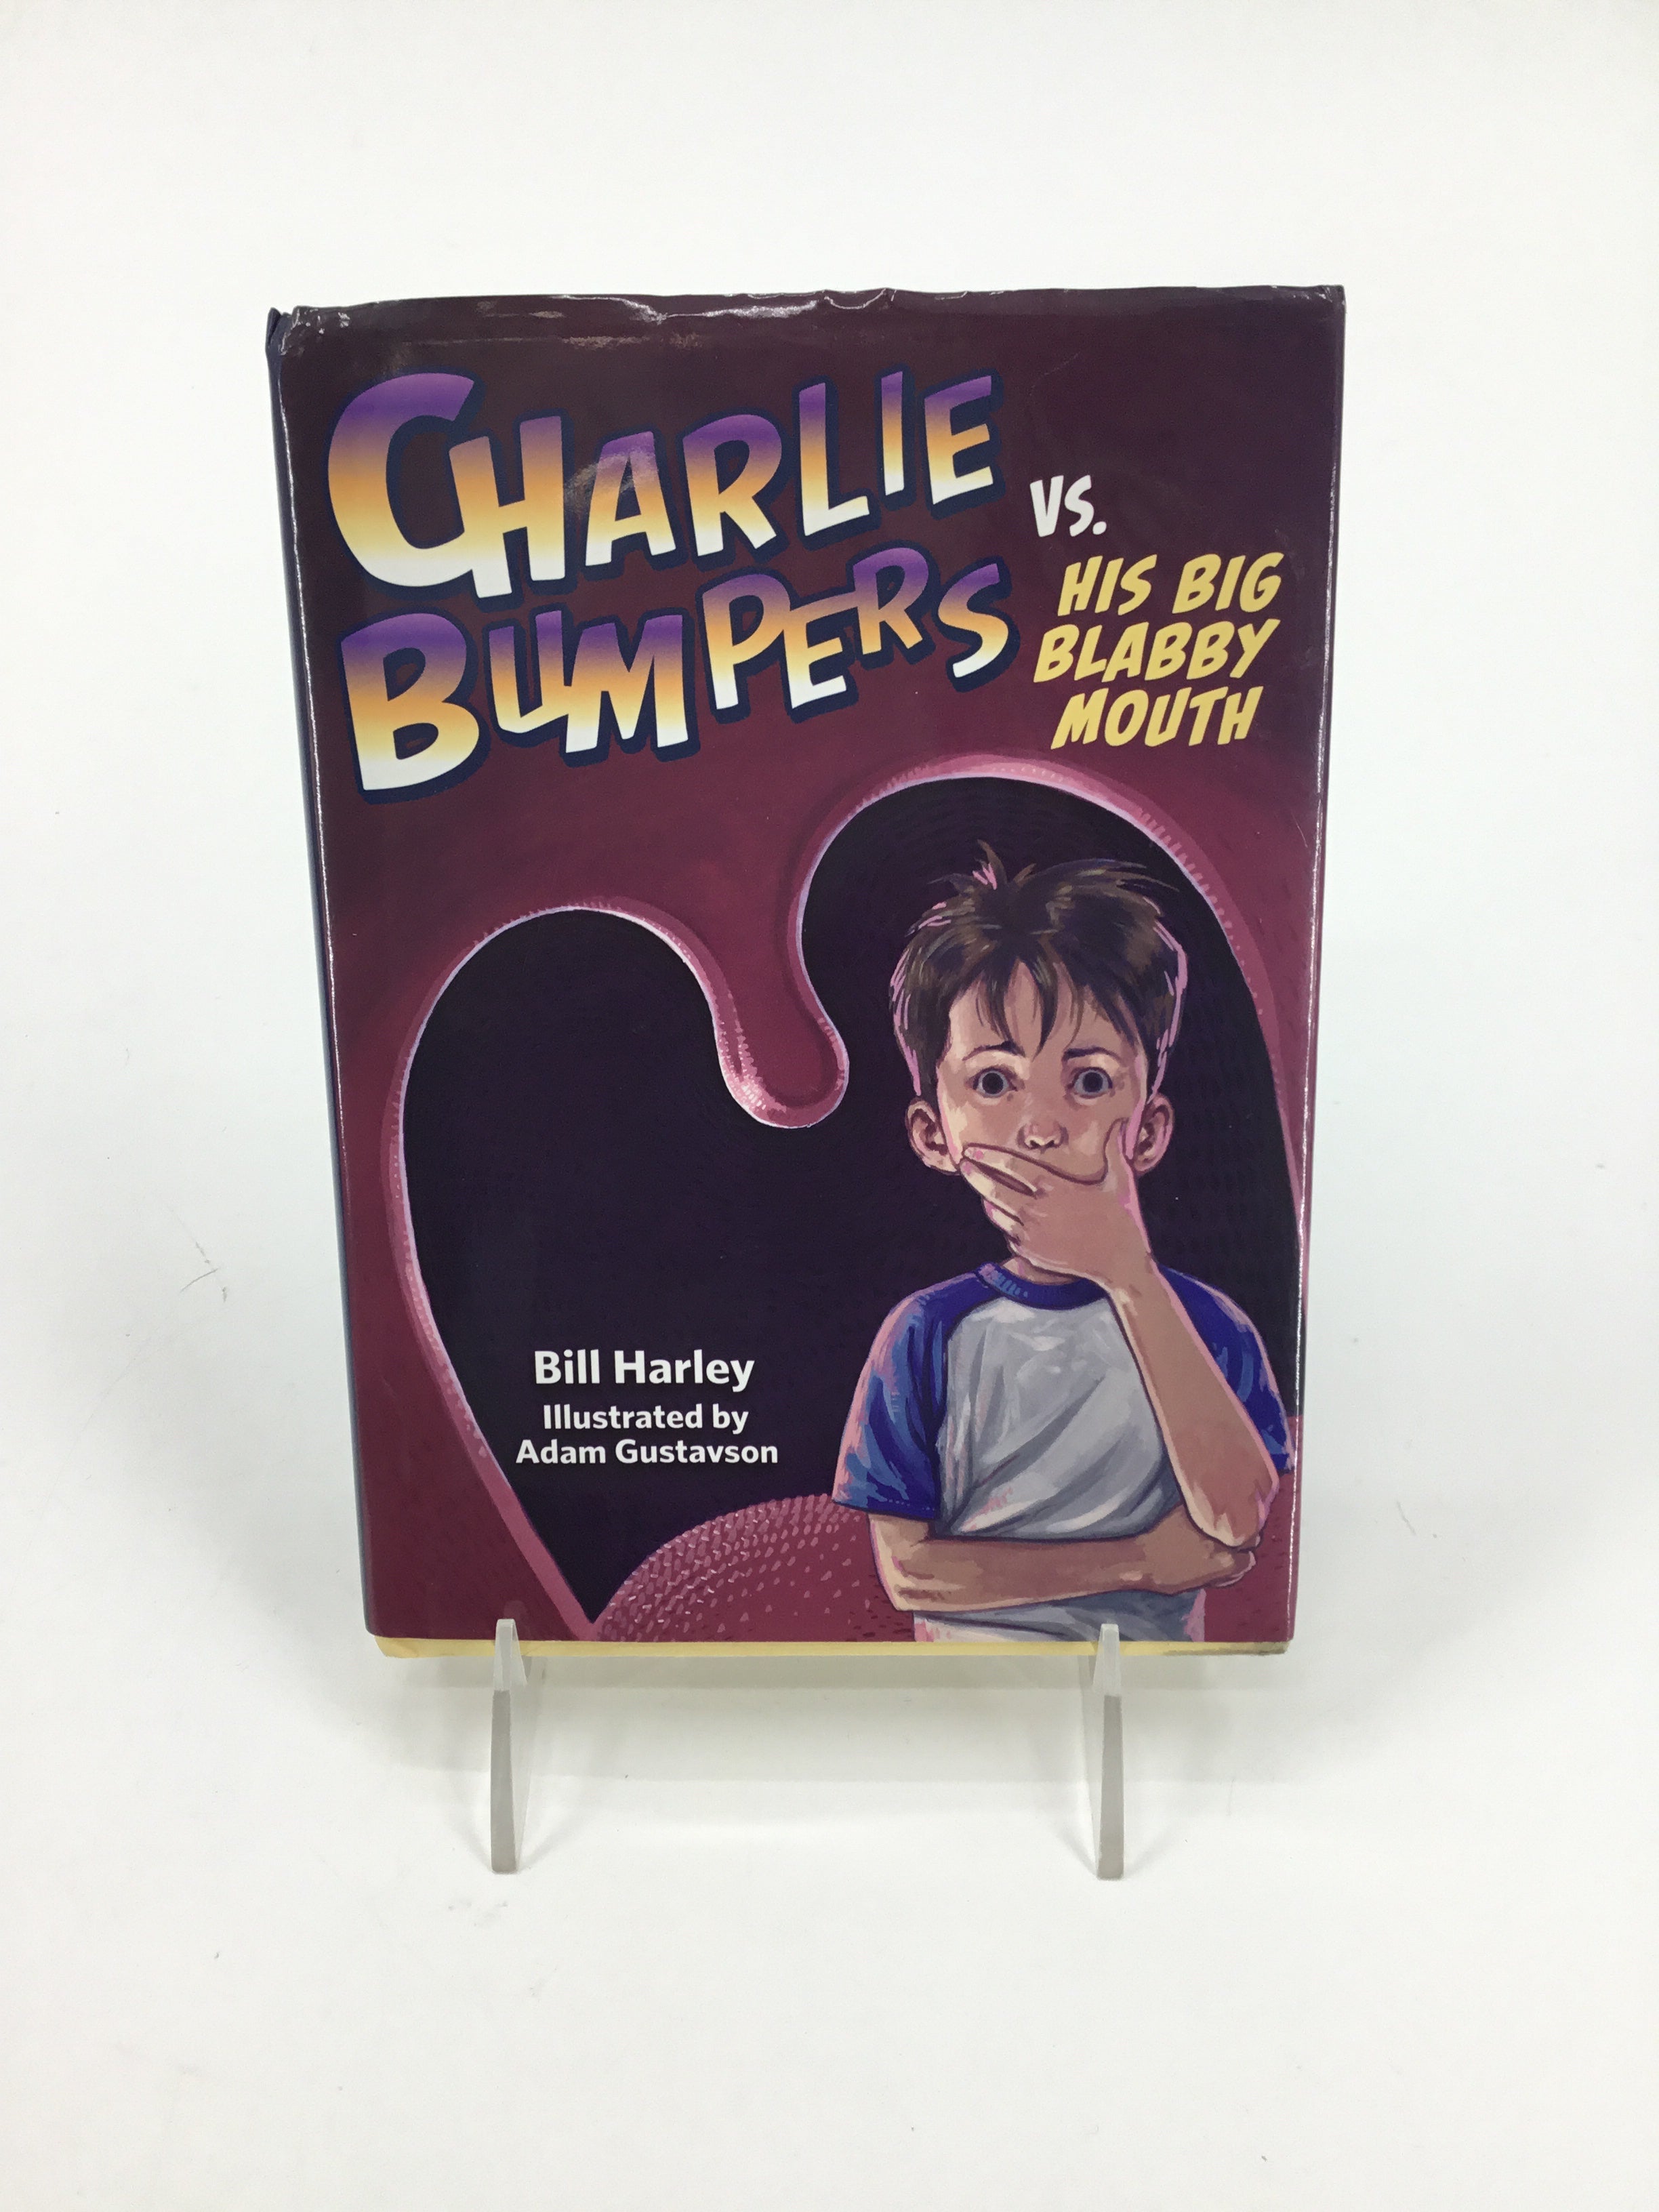 Charlie Bumpers vs. His Blabby Mouth Hardback Book